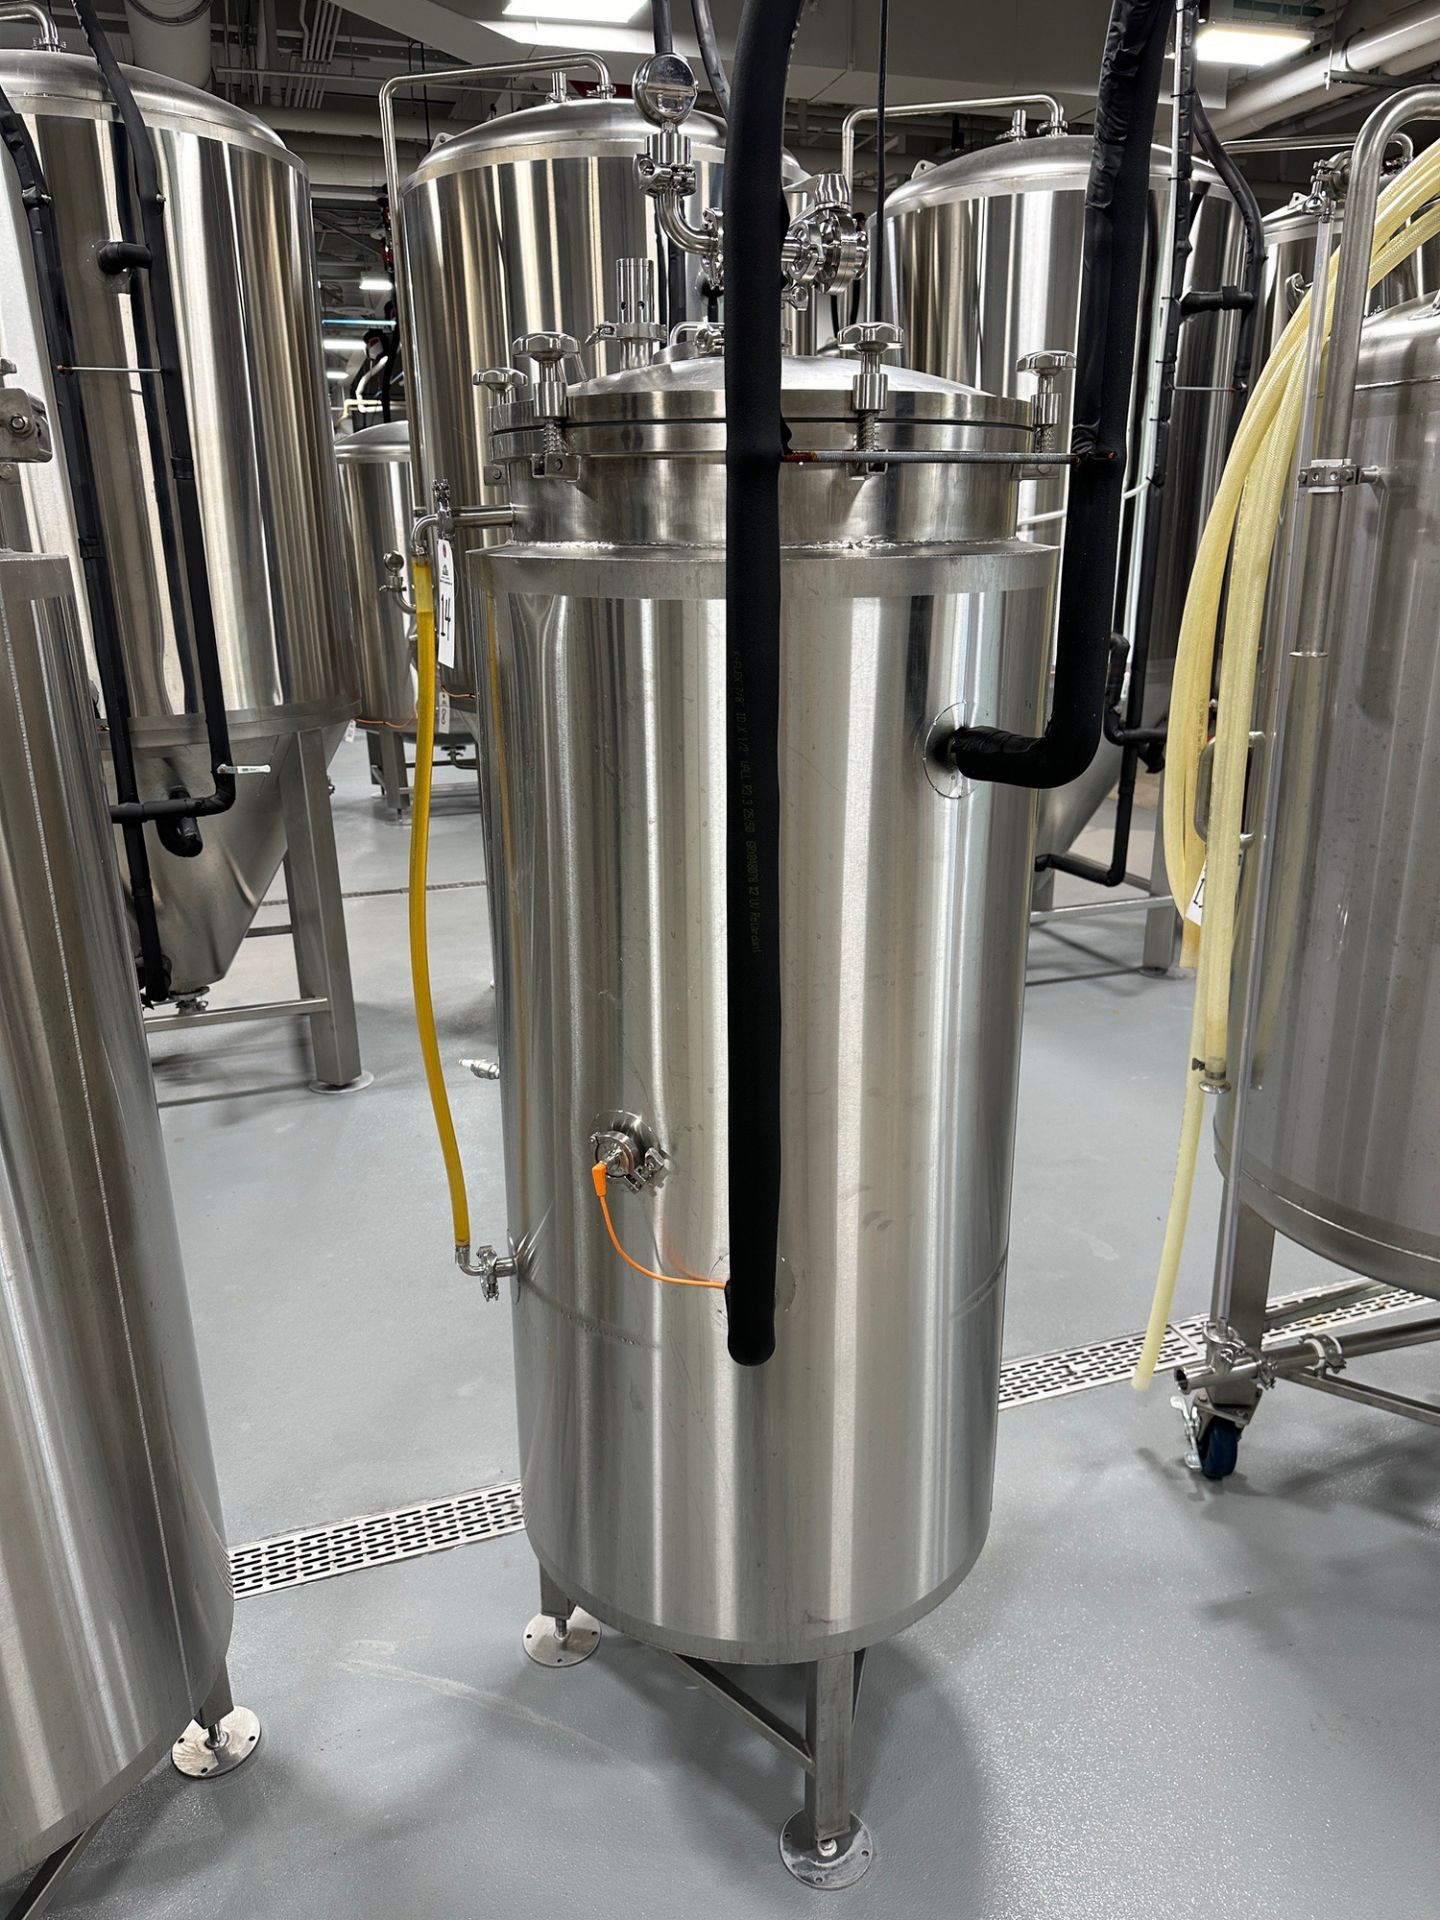 Portland Kettle Works 2 BBL Stainless Steel Unitank - Glycol Jacketed, Zwickle Valve, Sight Glass ( - Image 2 of 2